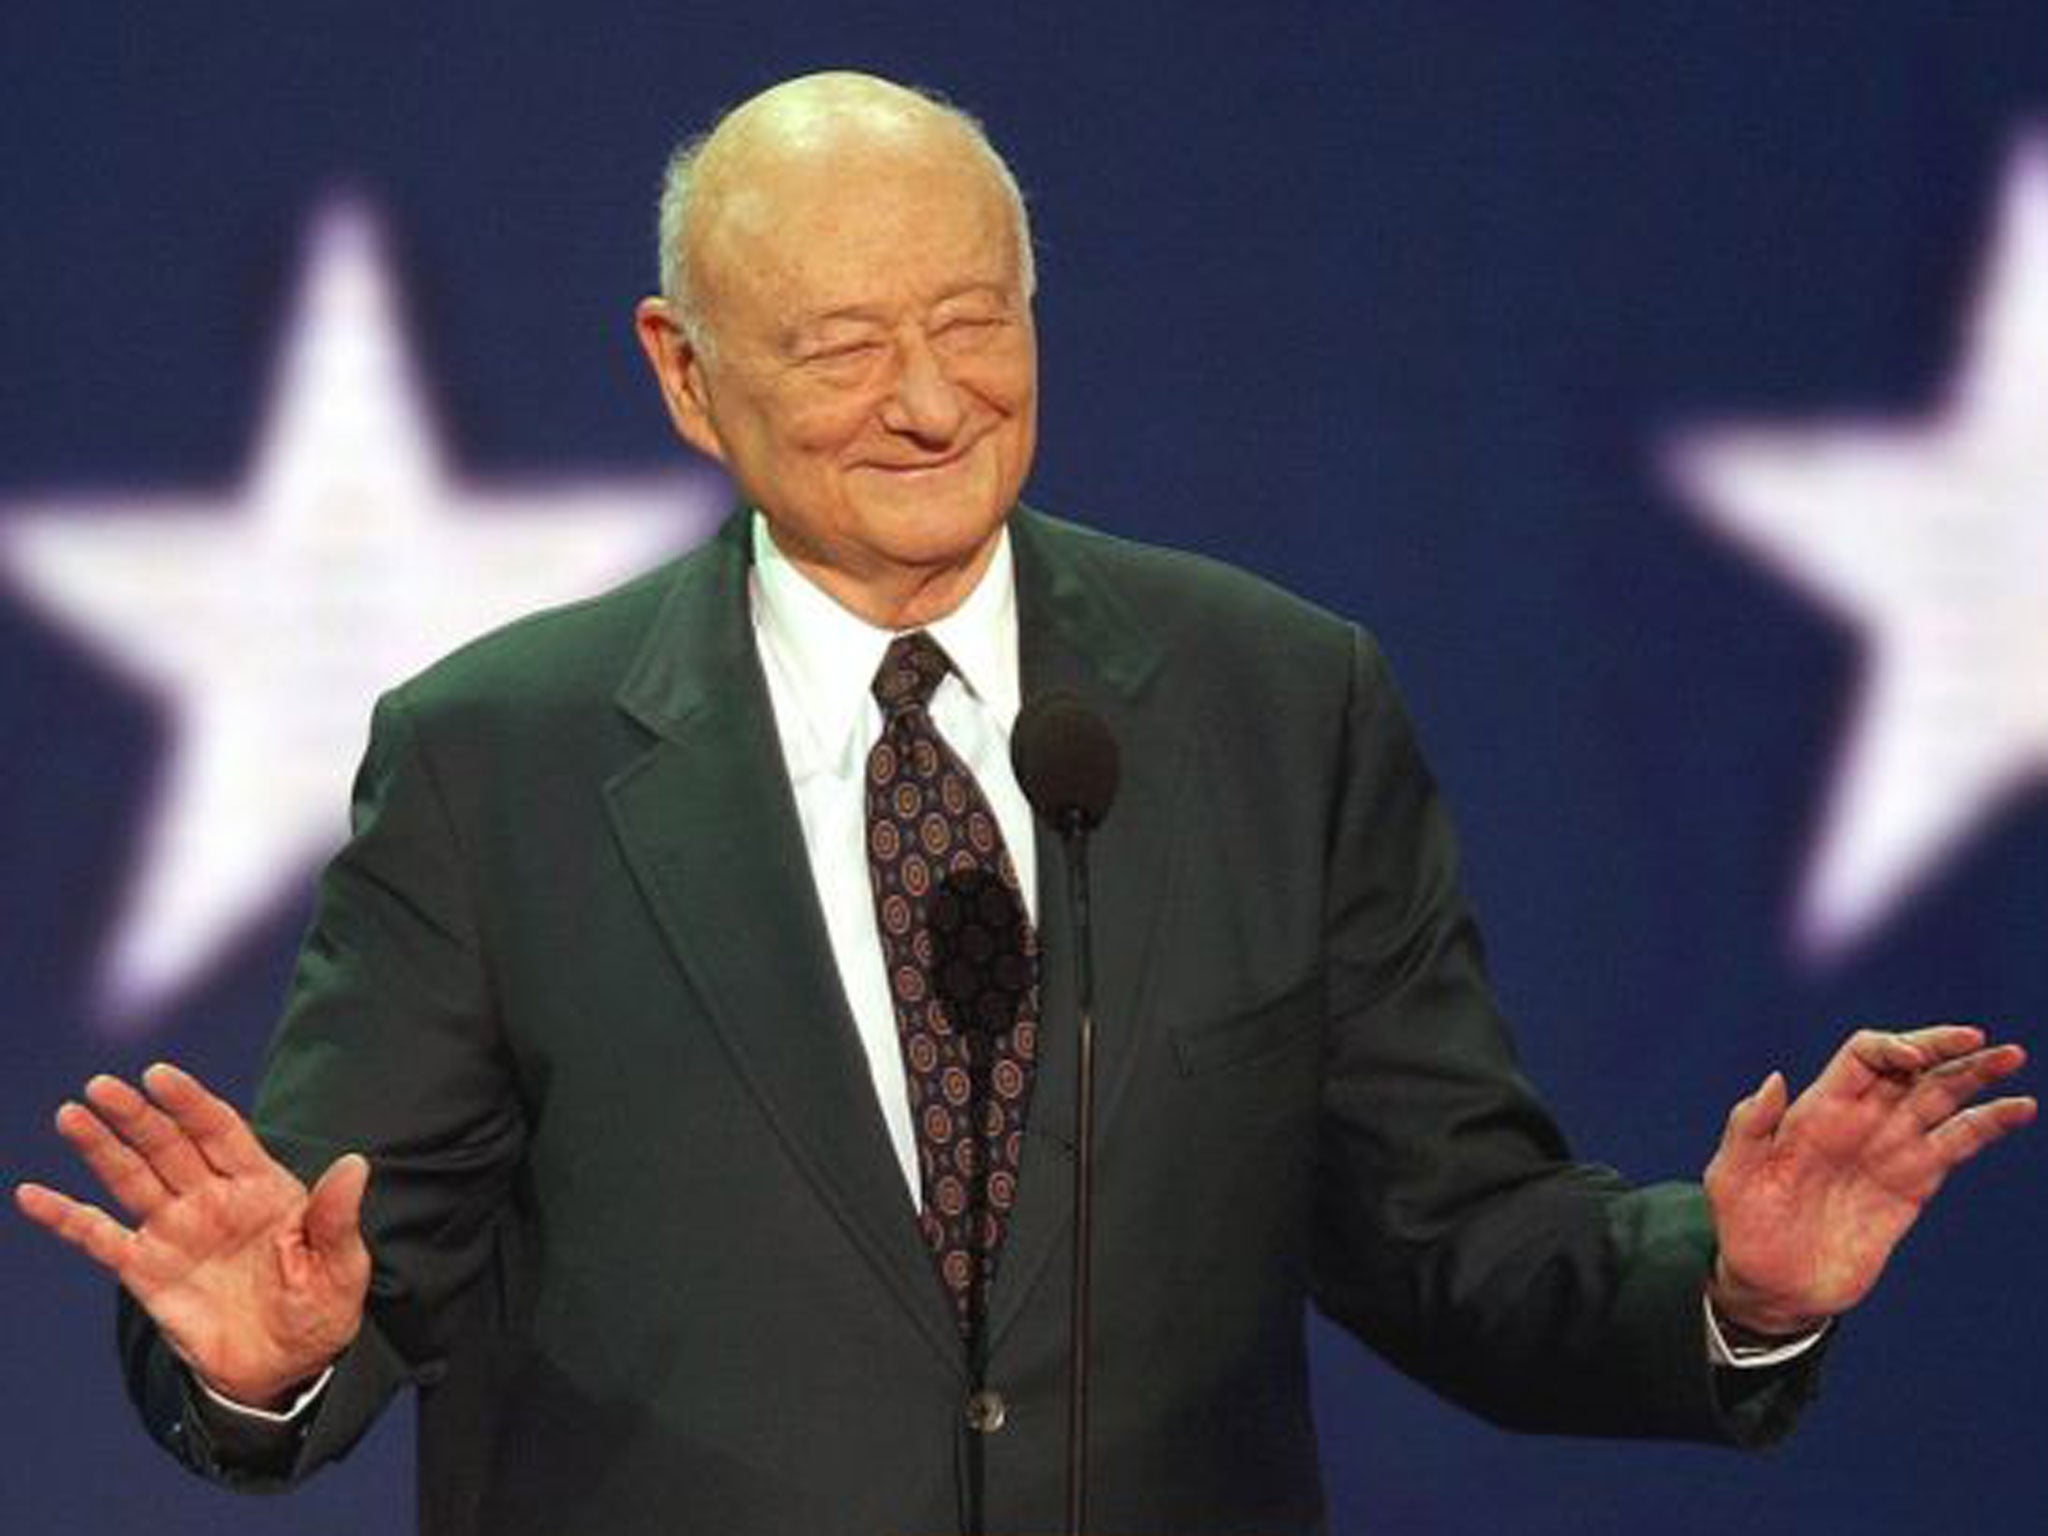 Former Mayor Ed Koch, the combative, acid-tongued politician who rescued New York City from near-financial ruin during an 11-year run in which he embodied the city's chutzpah for the rest of the world, died Friday